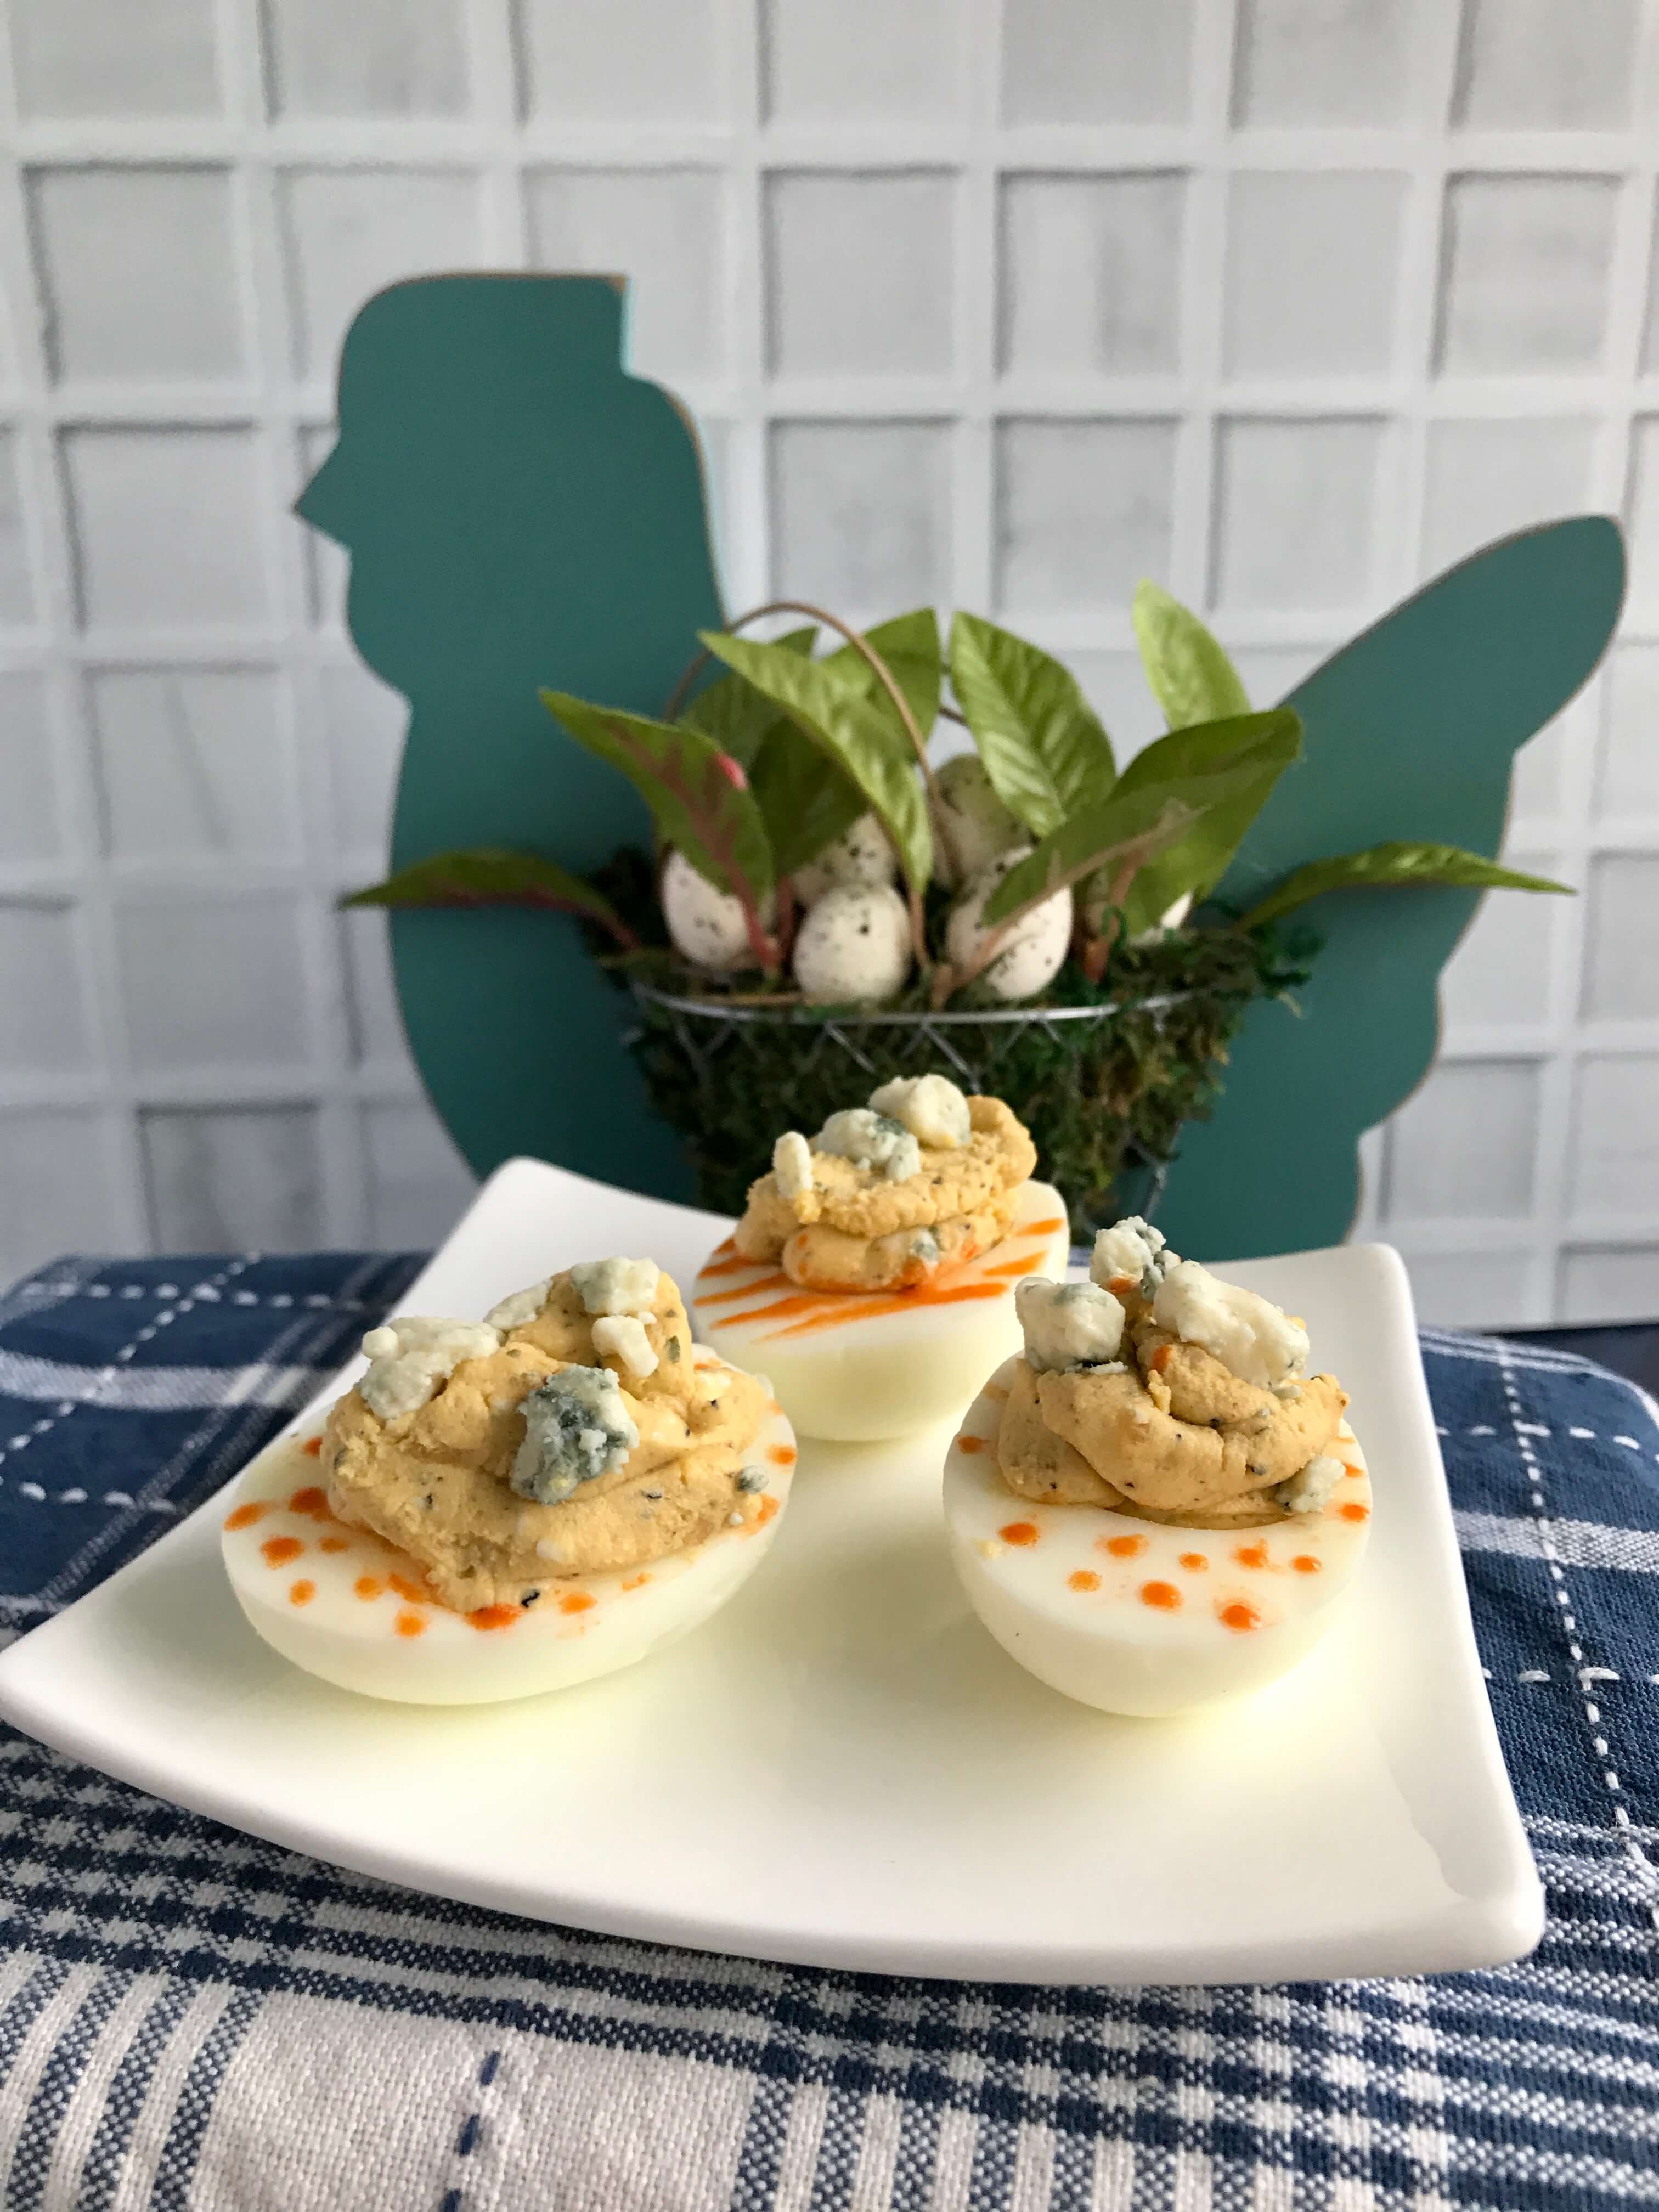 Buffalo Blue Cheese Deviled Eggs | Spicy Deviled Eggs Recipe | Easter Hardboiled Egg Leftovers | Nutrition Nuptials | Mandy Enright MS RDN RYT